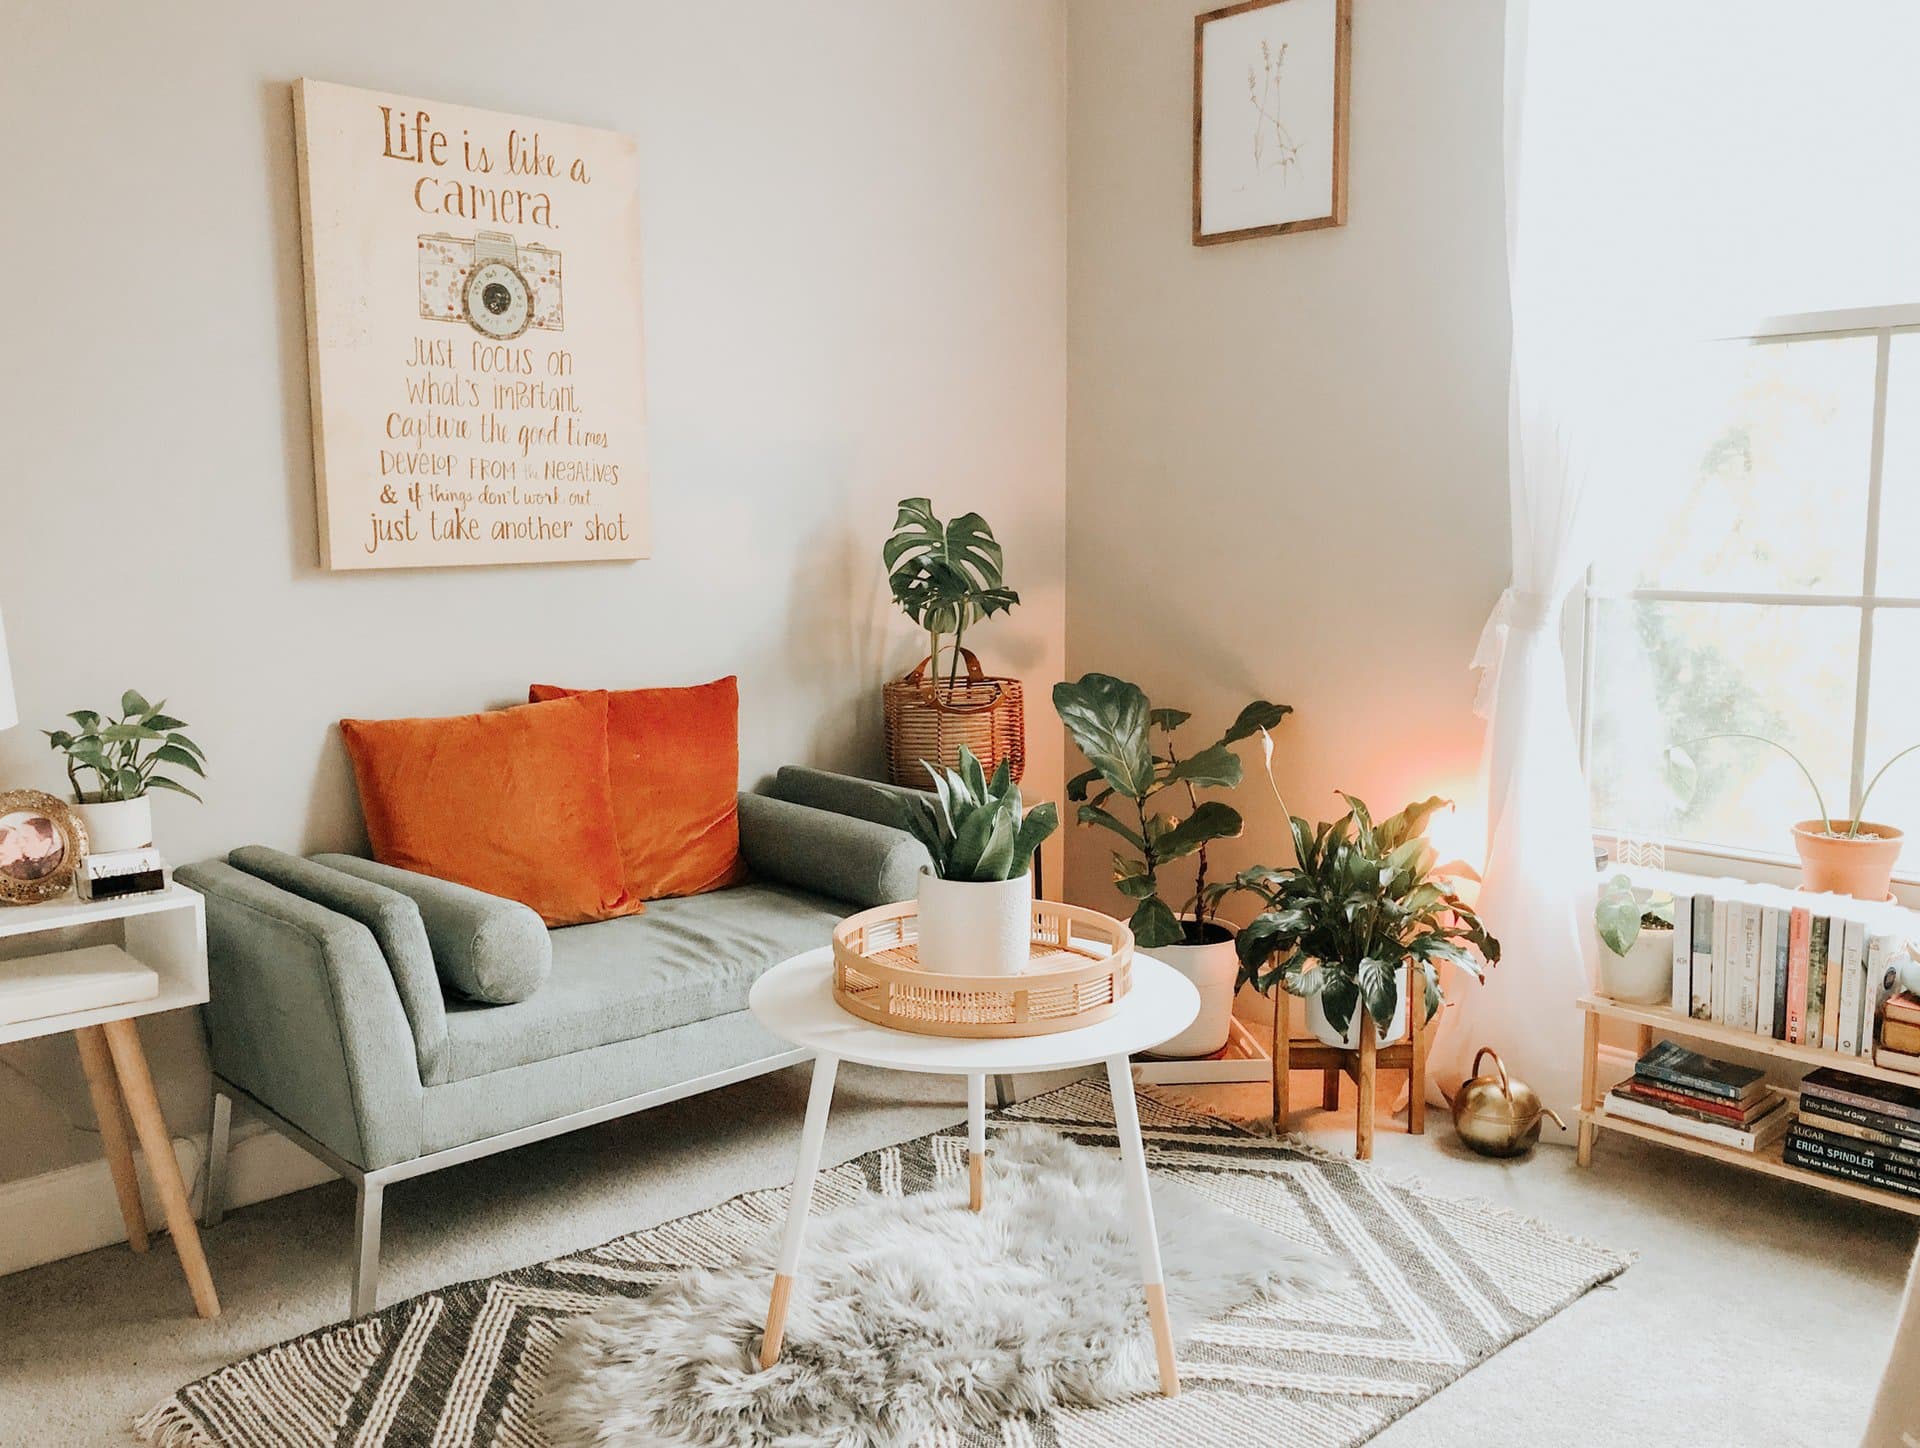  Make Gray and Orange Fit a Small Space